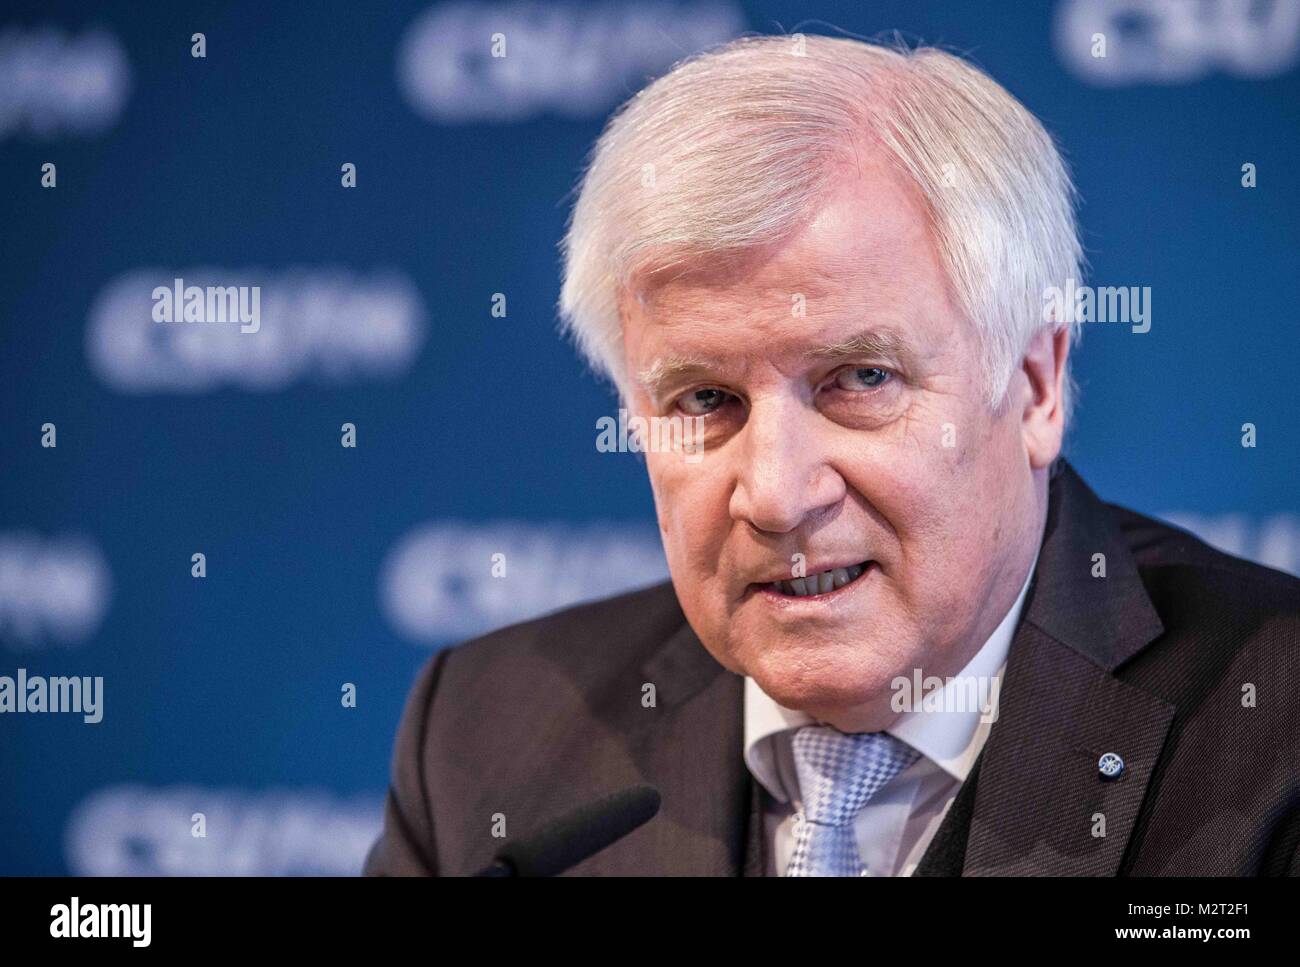 Munich, Bavaria, Germany. 8th Feb, 2018. Horst Seehofer, head of Angela Merkel's Bavarian sister party the CSU held a conference one day after a 177-page agreement between Angela Merkel and the SPD was made in order to create a viable government and avoid new elections. Credit: ZUMA Press, Inc./Alamy Live News Stock Photo